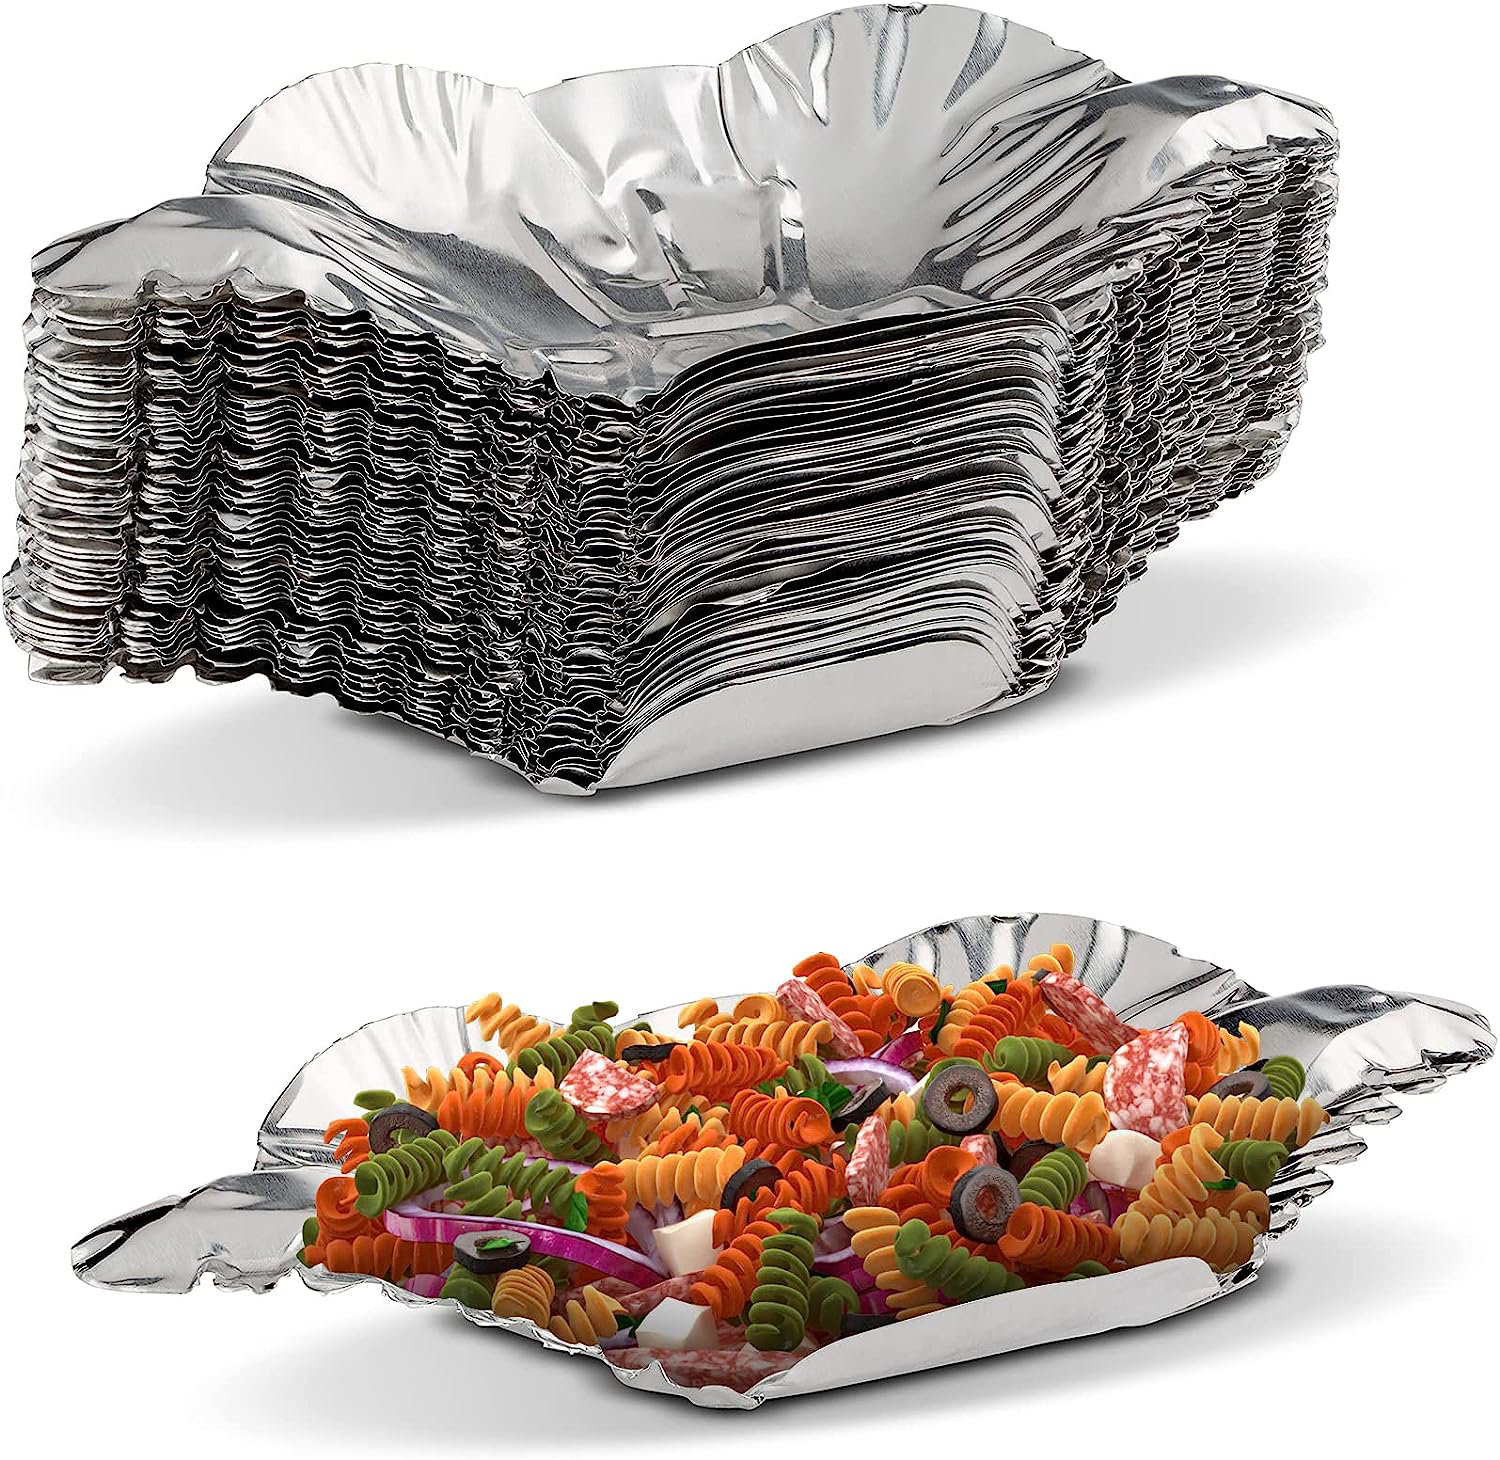 Round Aluminum Foil Take-Out Pans, Disposable Food Tin Containers –  EcoQuality Store